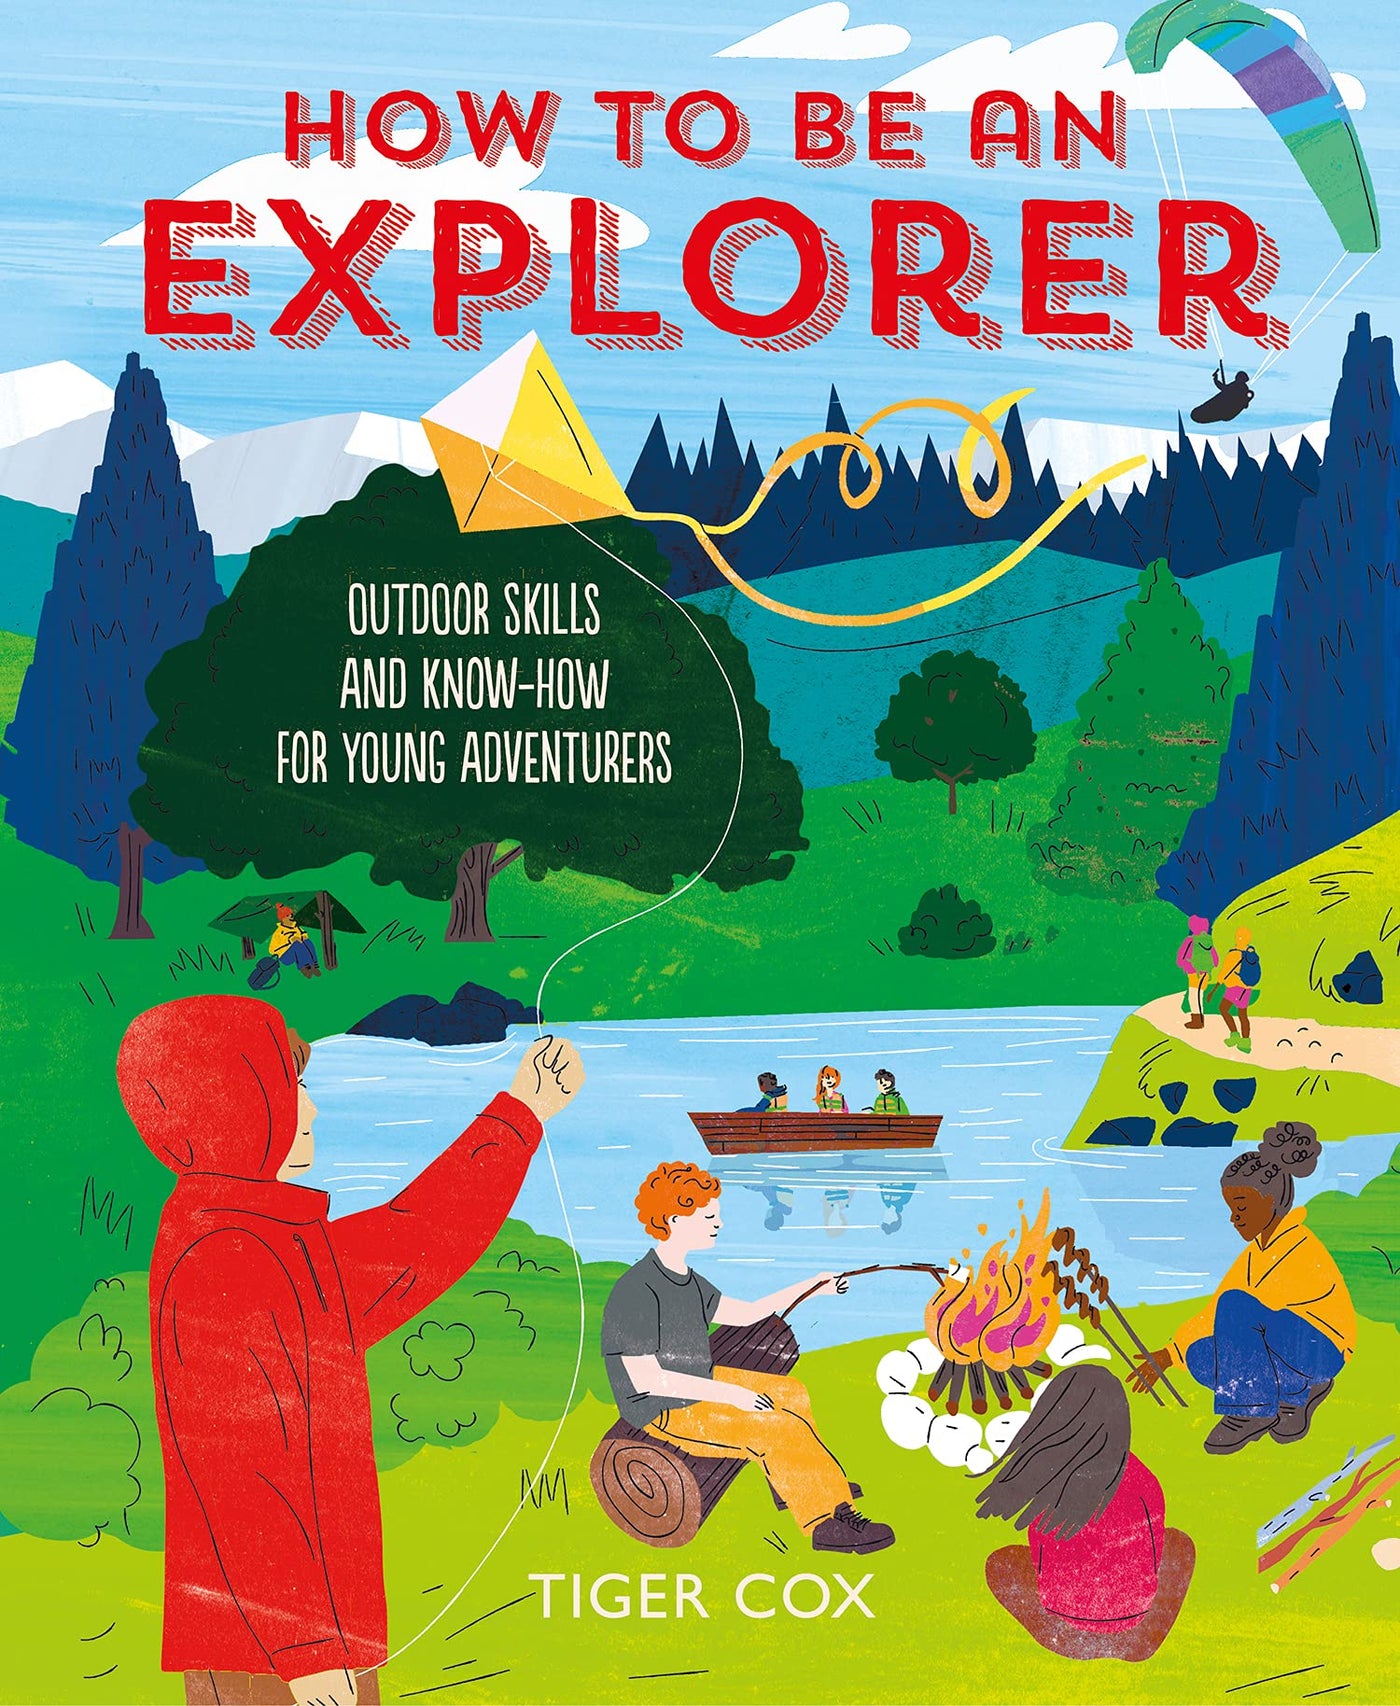 How To Be An Explorer: Outdoor Skills and Know-How For Young